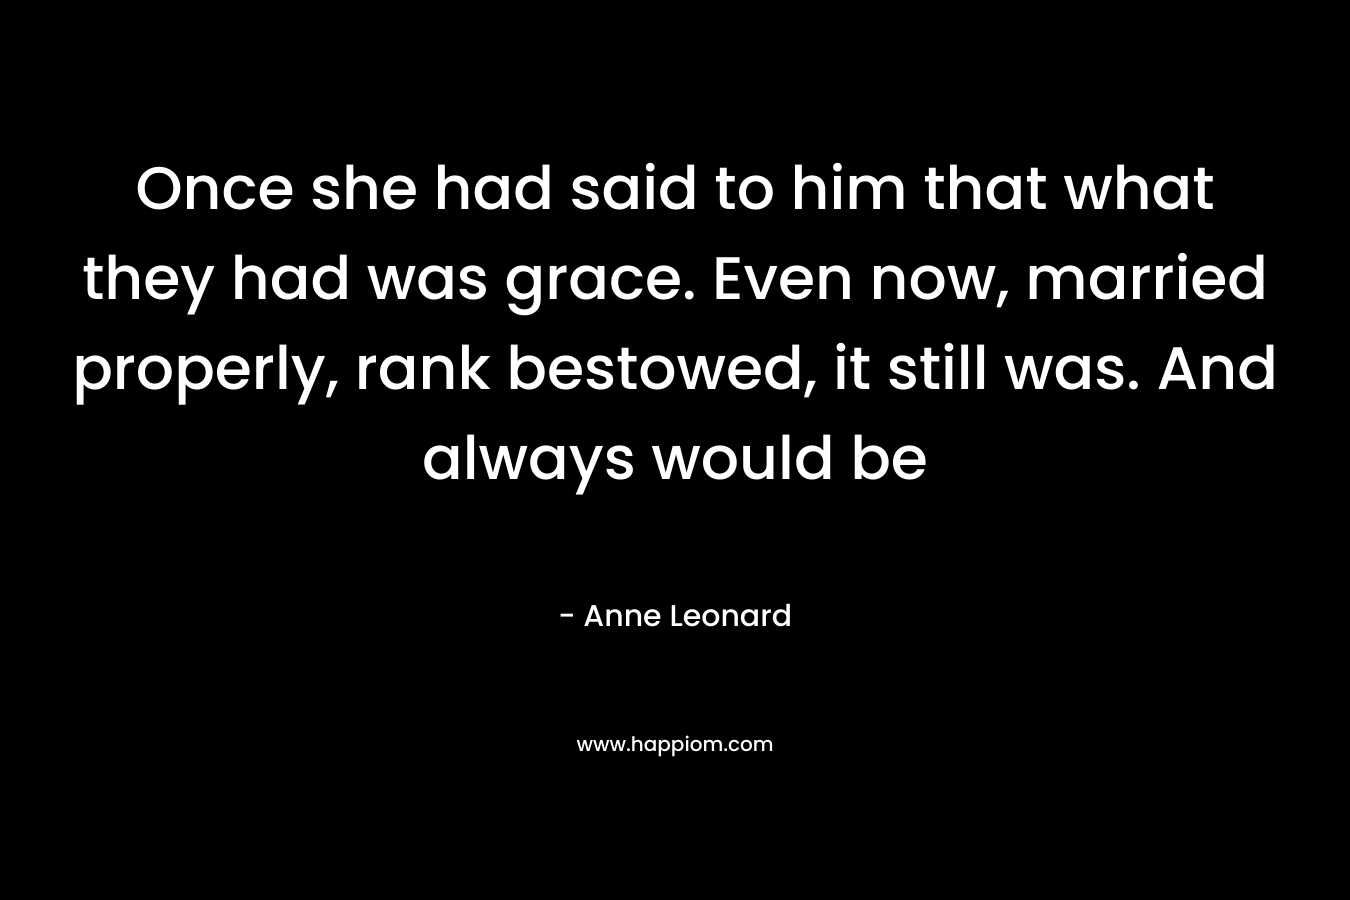 Once she had said to him that what they had was grace. Even now, married properly, rank bestowed, it still was. And always would be – Anne Leonard